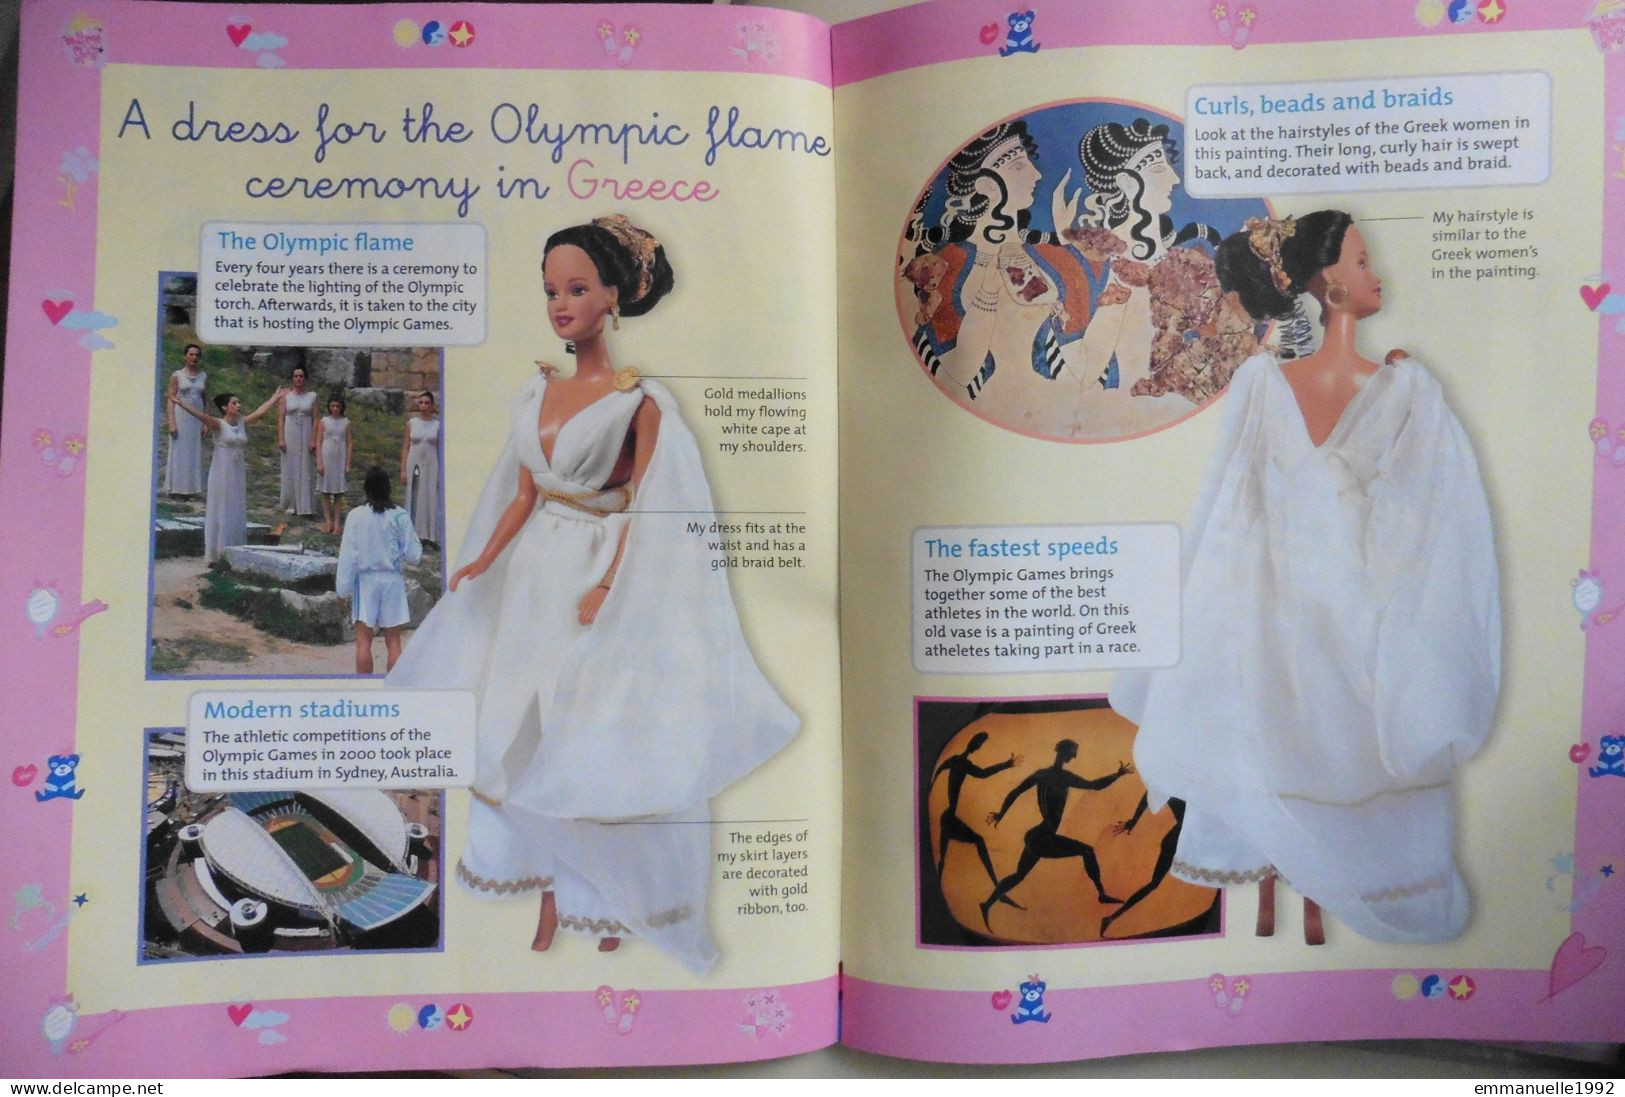 Neuf - Robe Barbie Grèce in Greece outfit 2002 Discover the world with Barbie n°13 - vêtement seul sans magazine